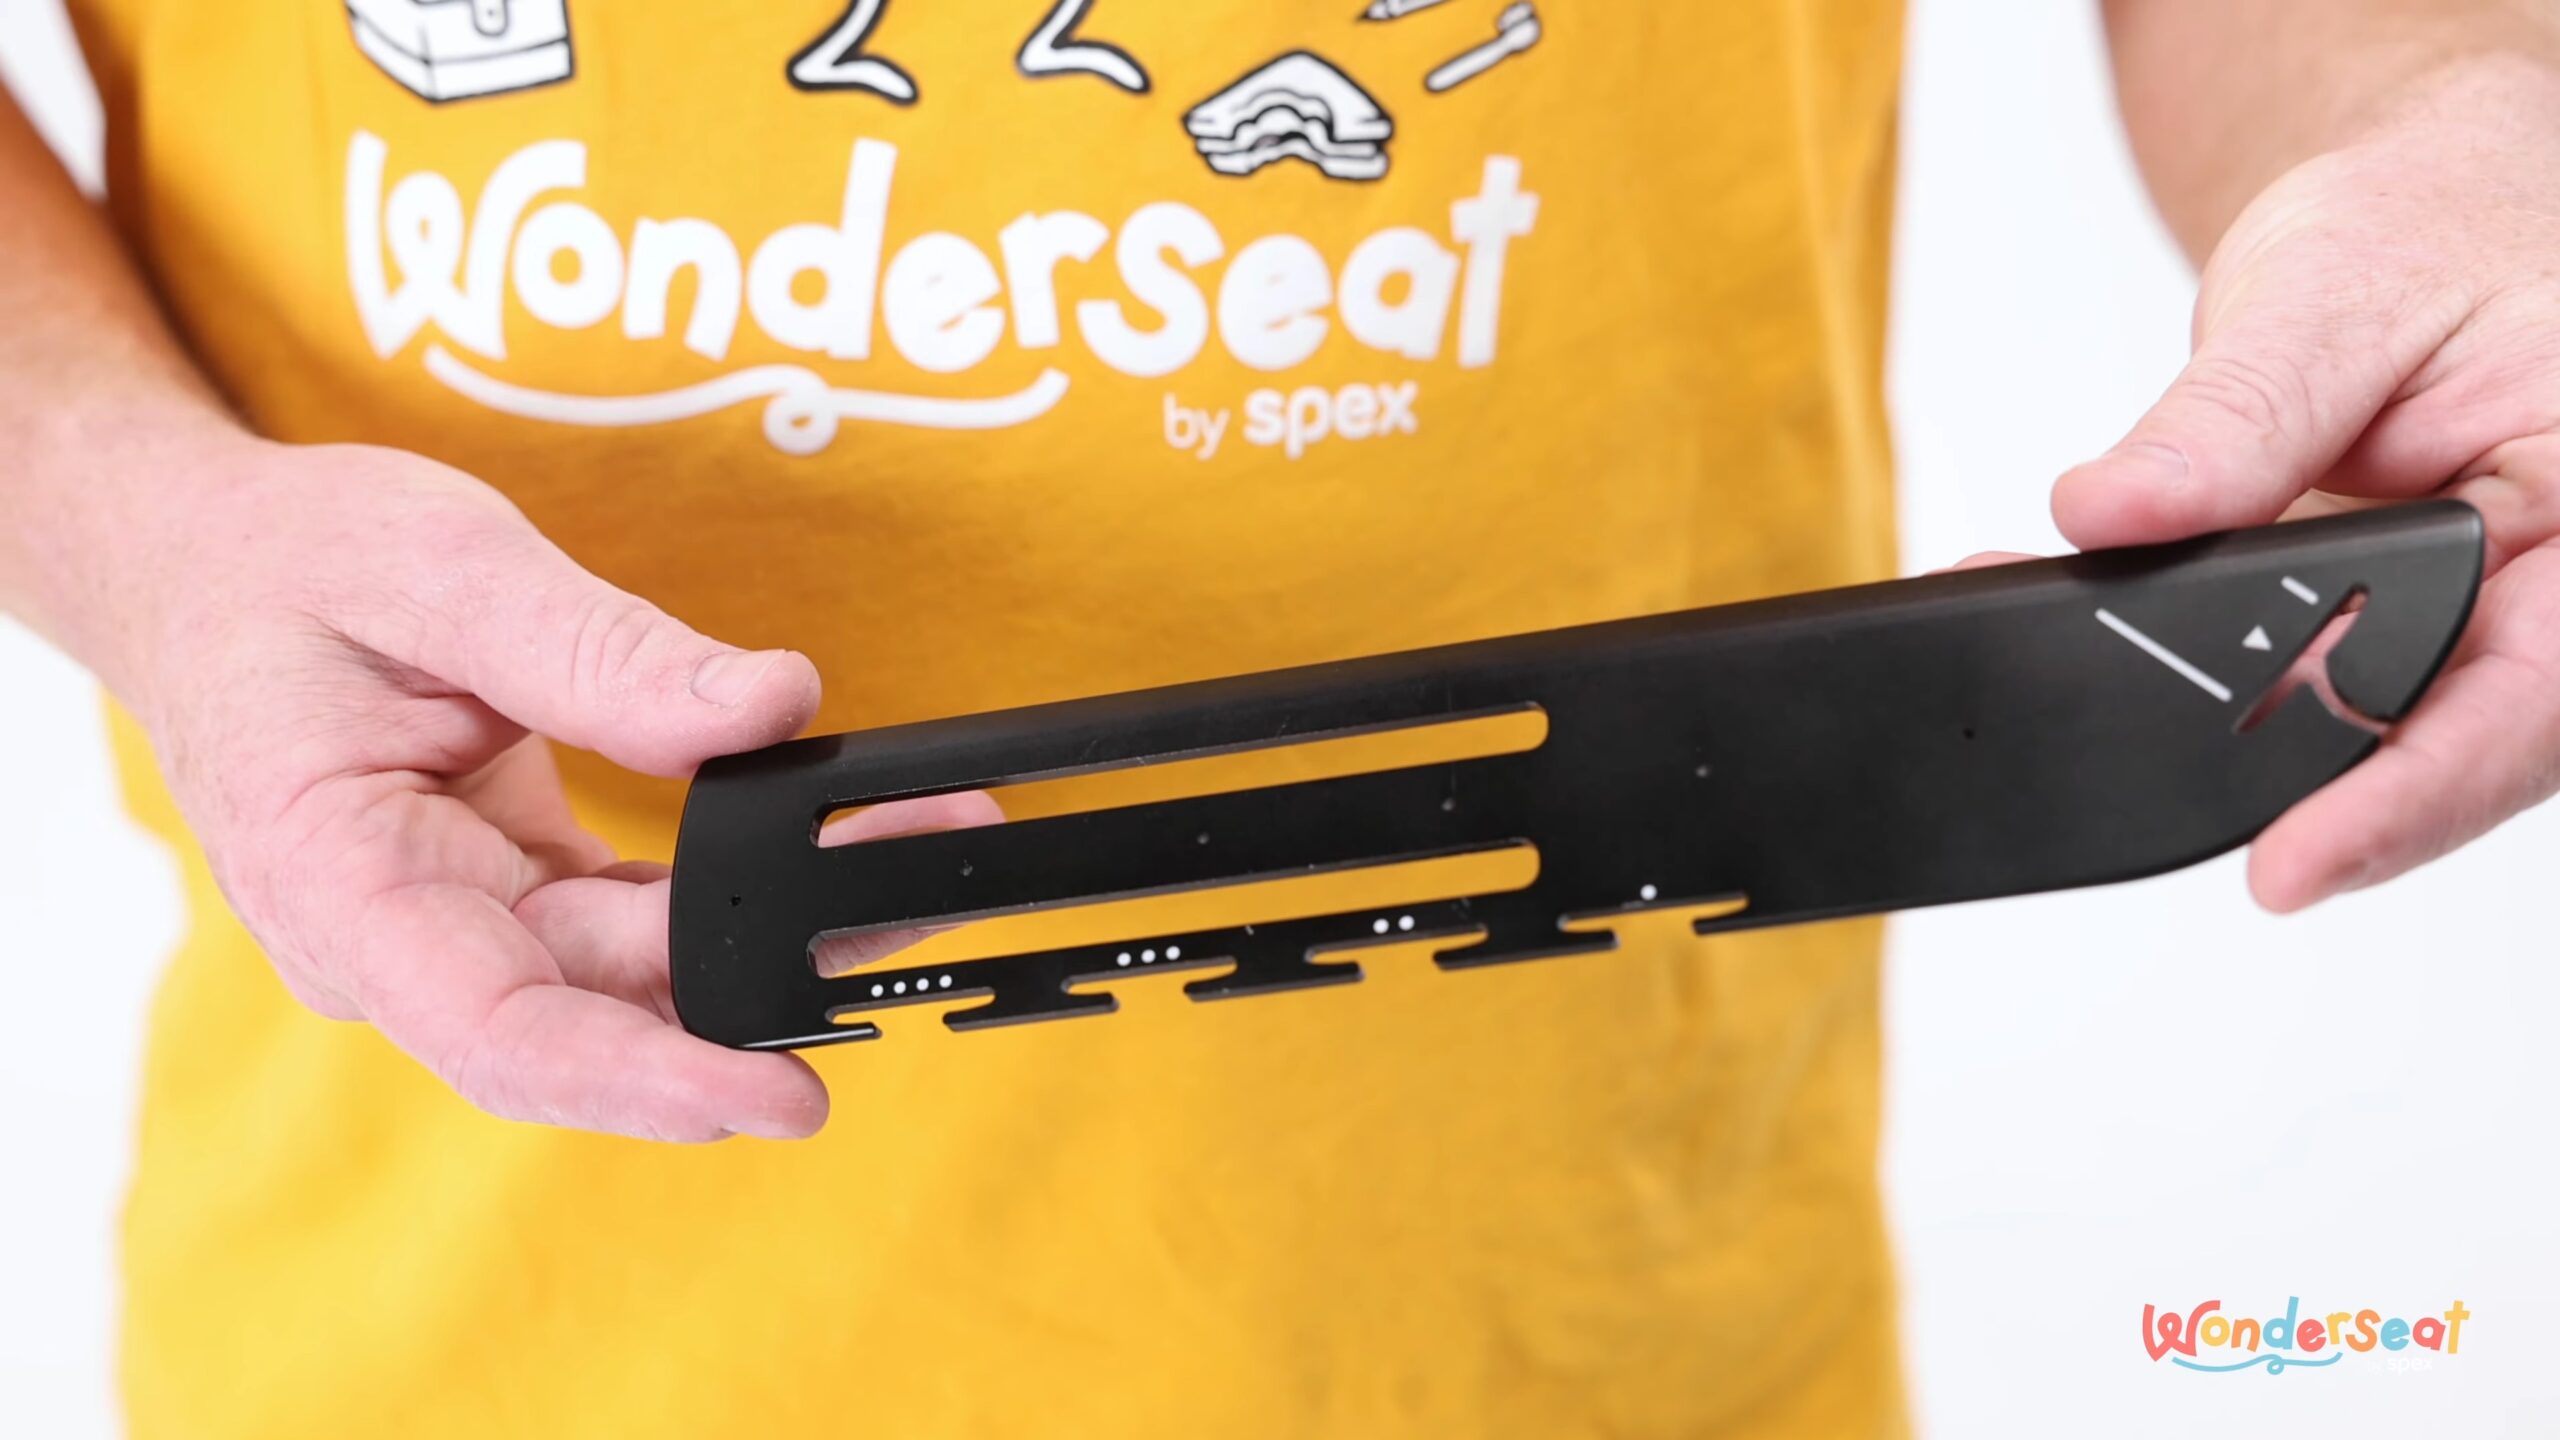 Person holding Wonderseat product showing its different features